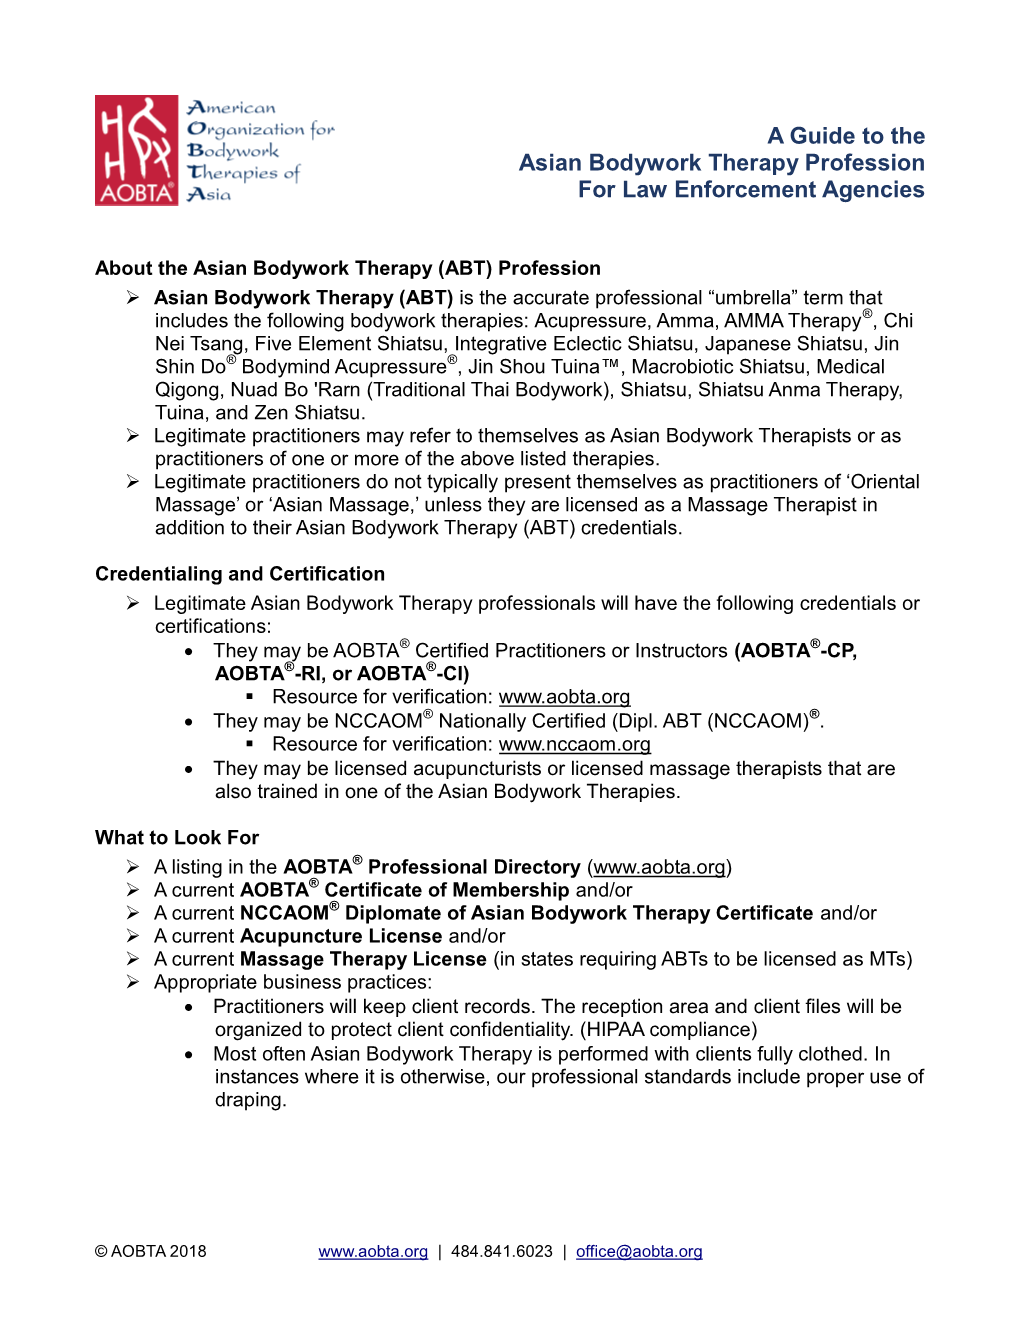 A Guide to the Asian Bodywork Therapy Profession for Law Enforcement Agencies